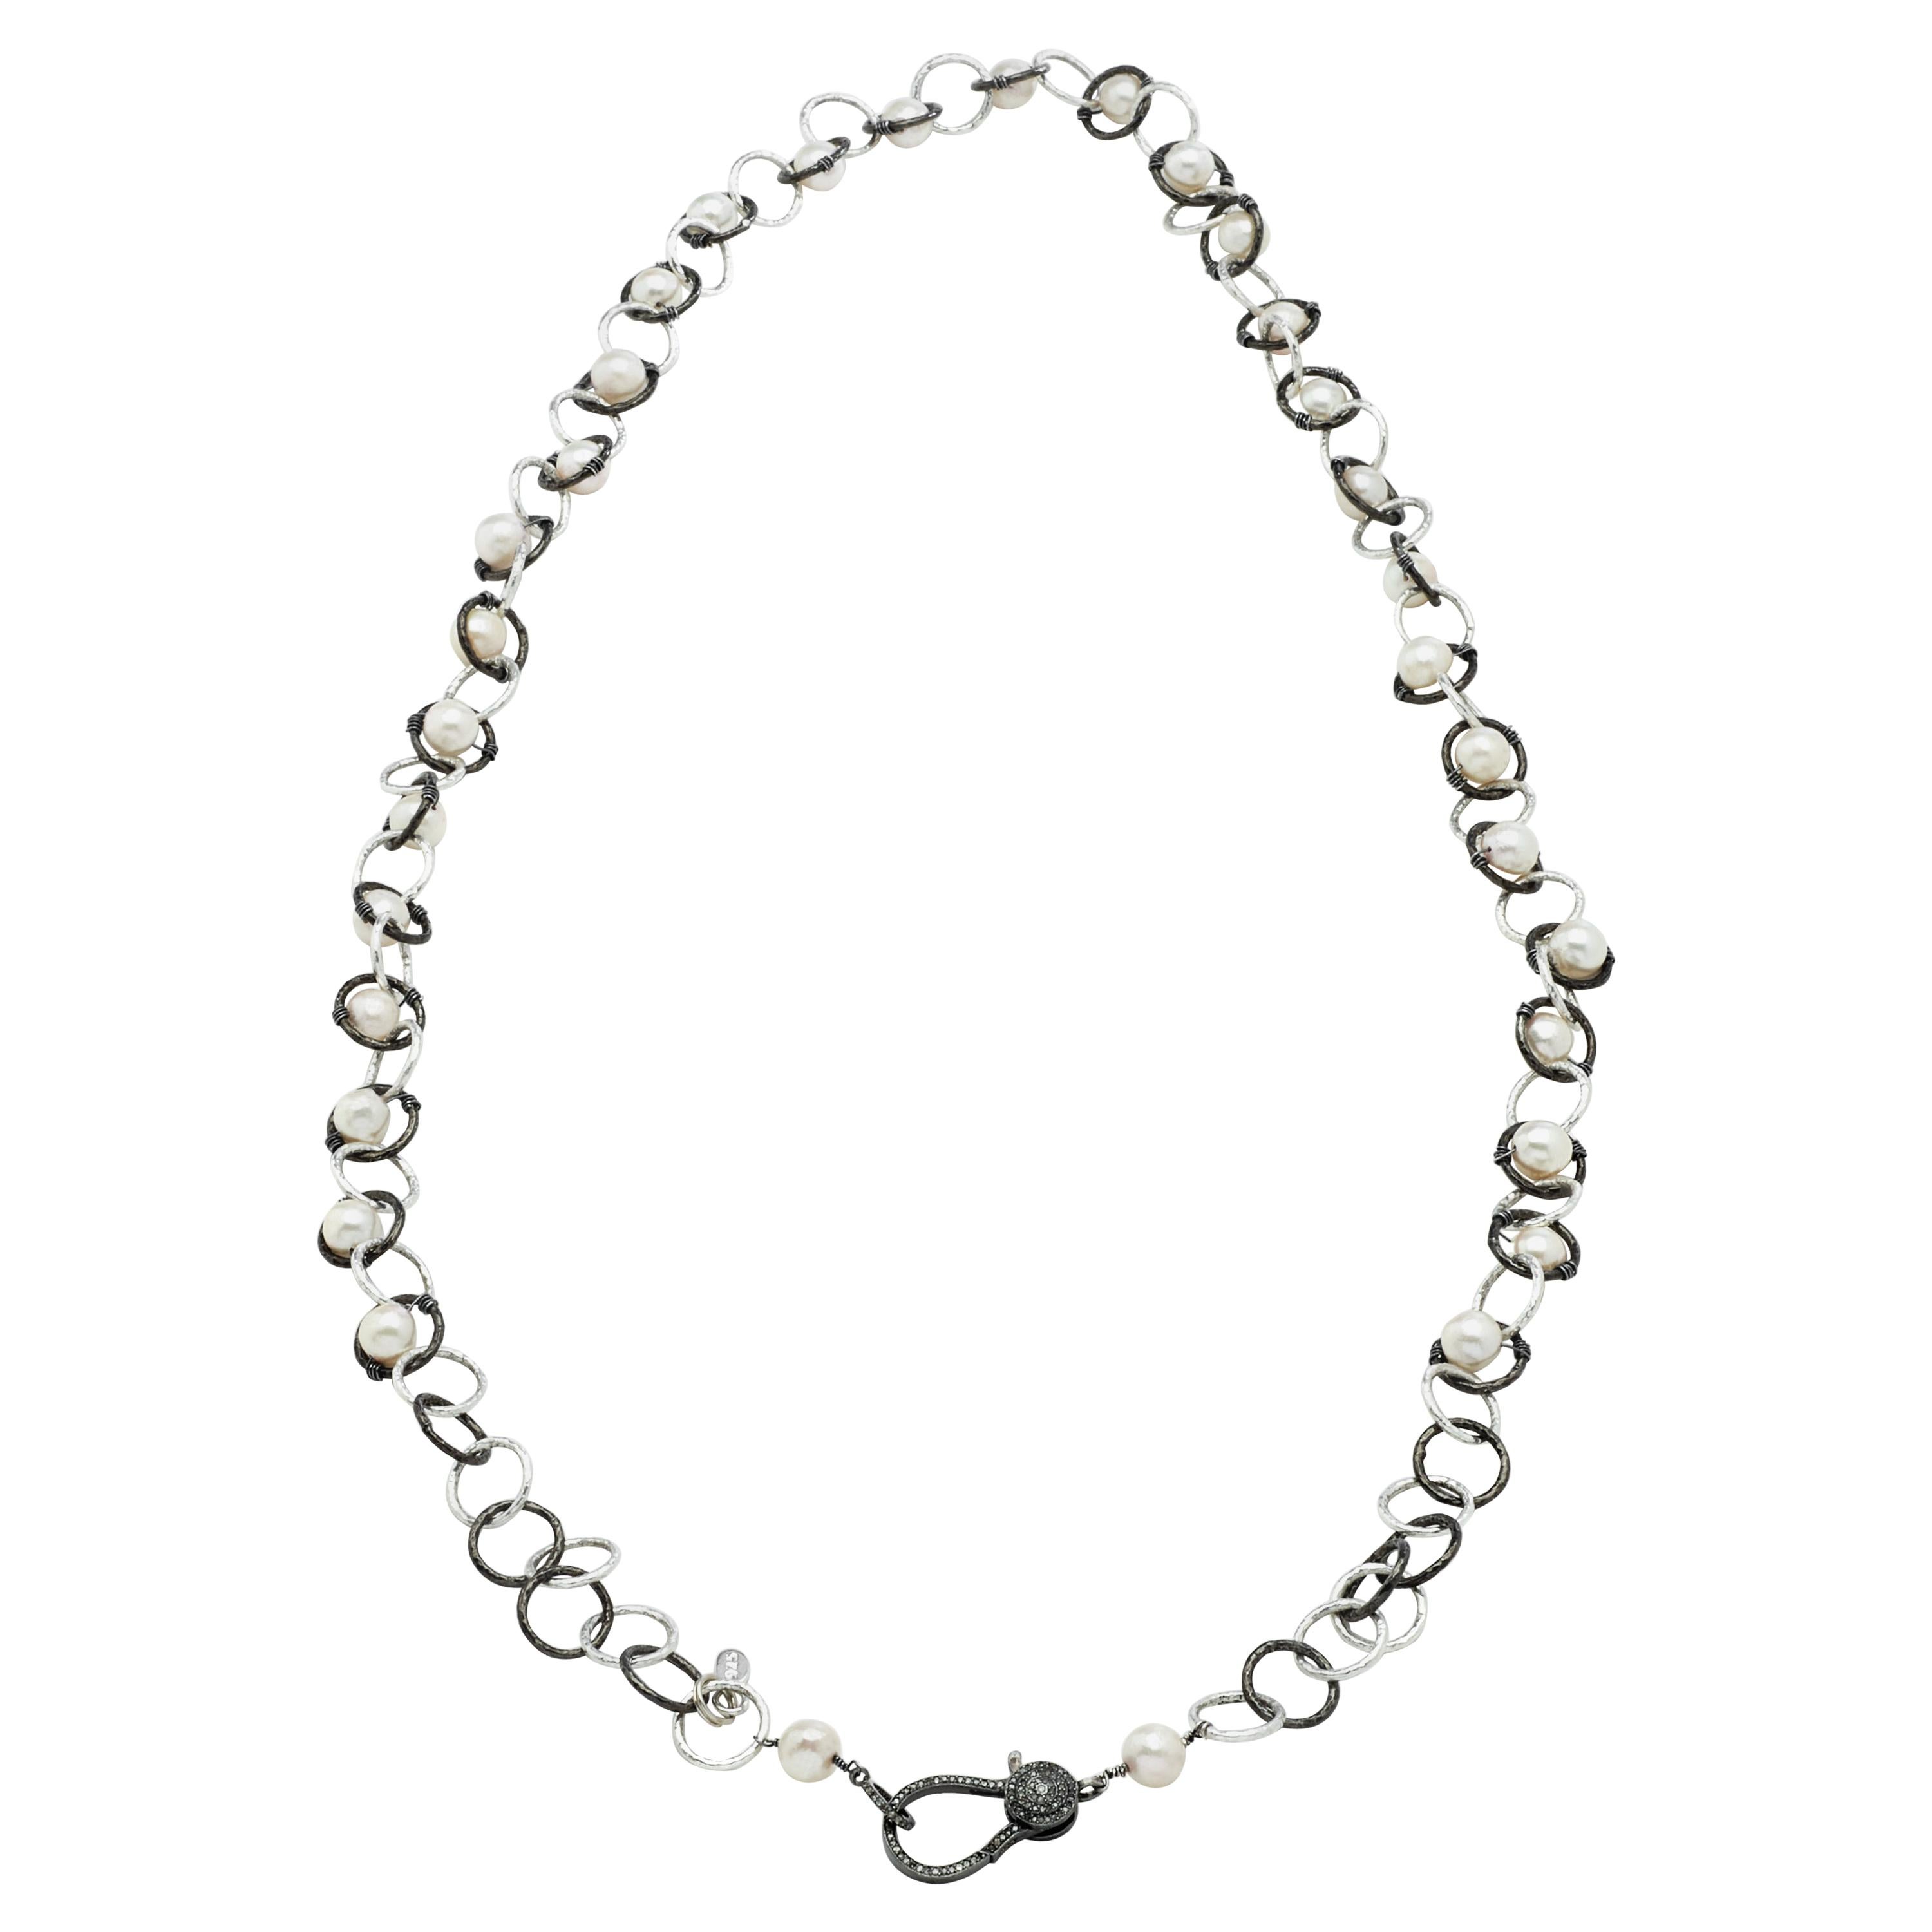  Two Tone Sterling Silver Chain Necklace with Pearls